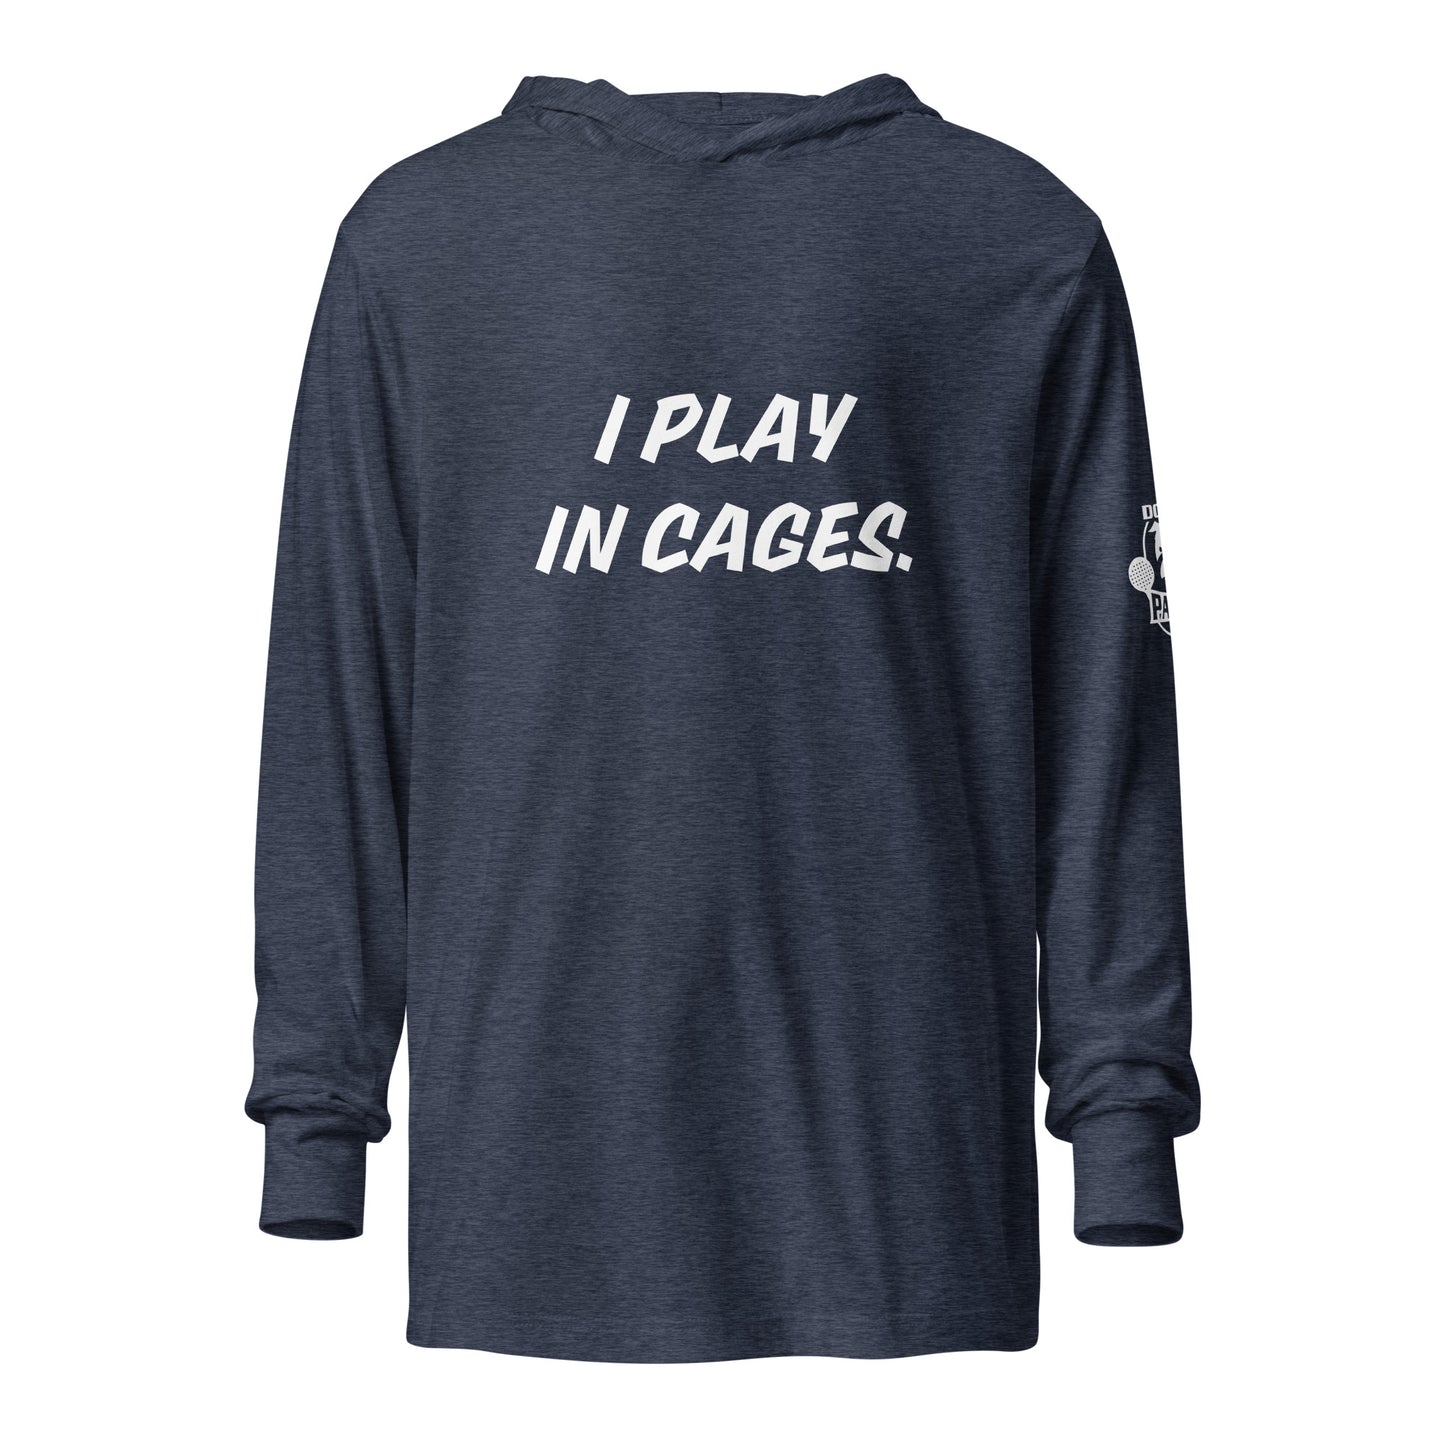 IN CAGES Lightweight Hoodie